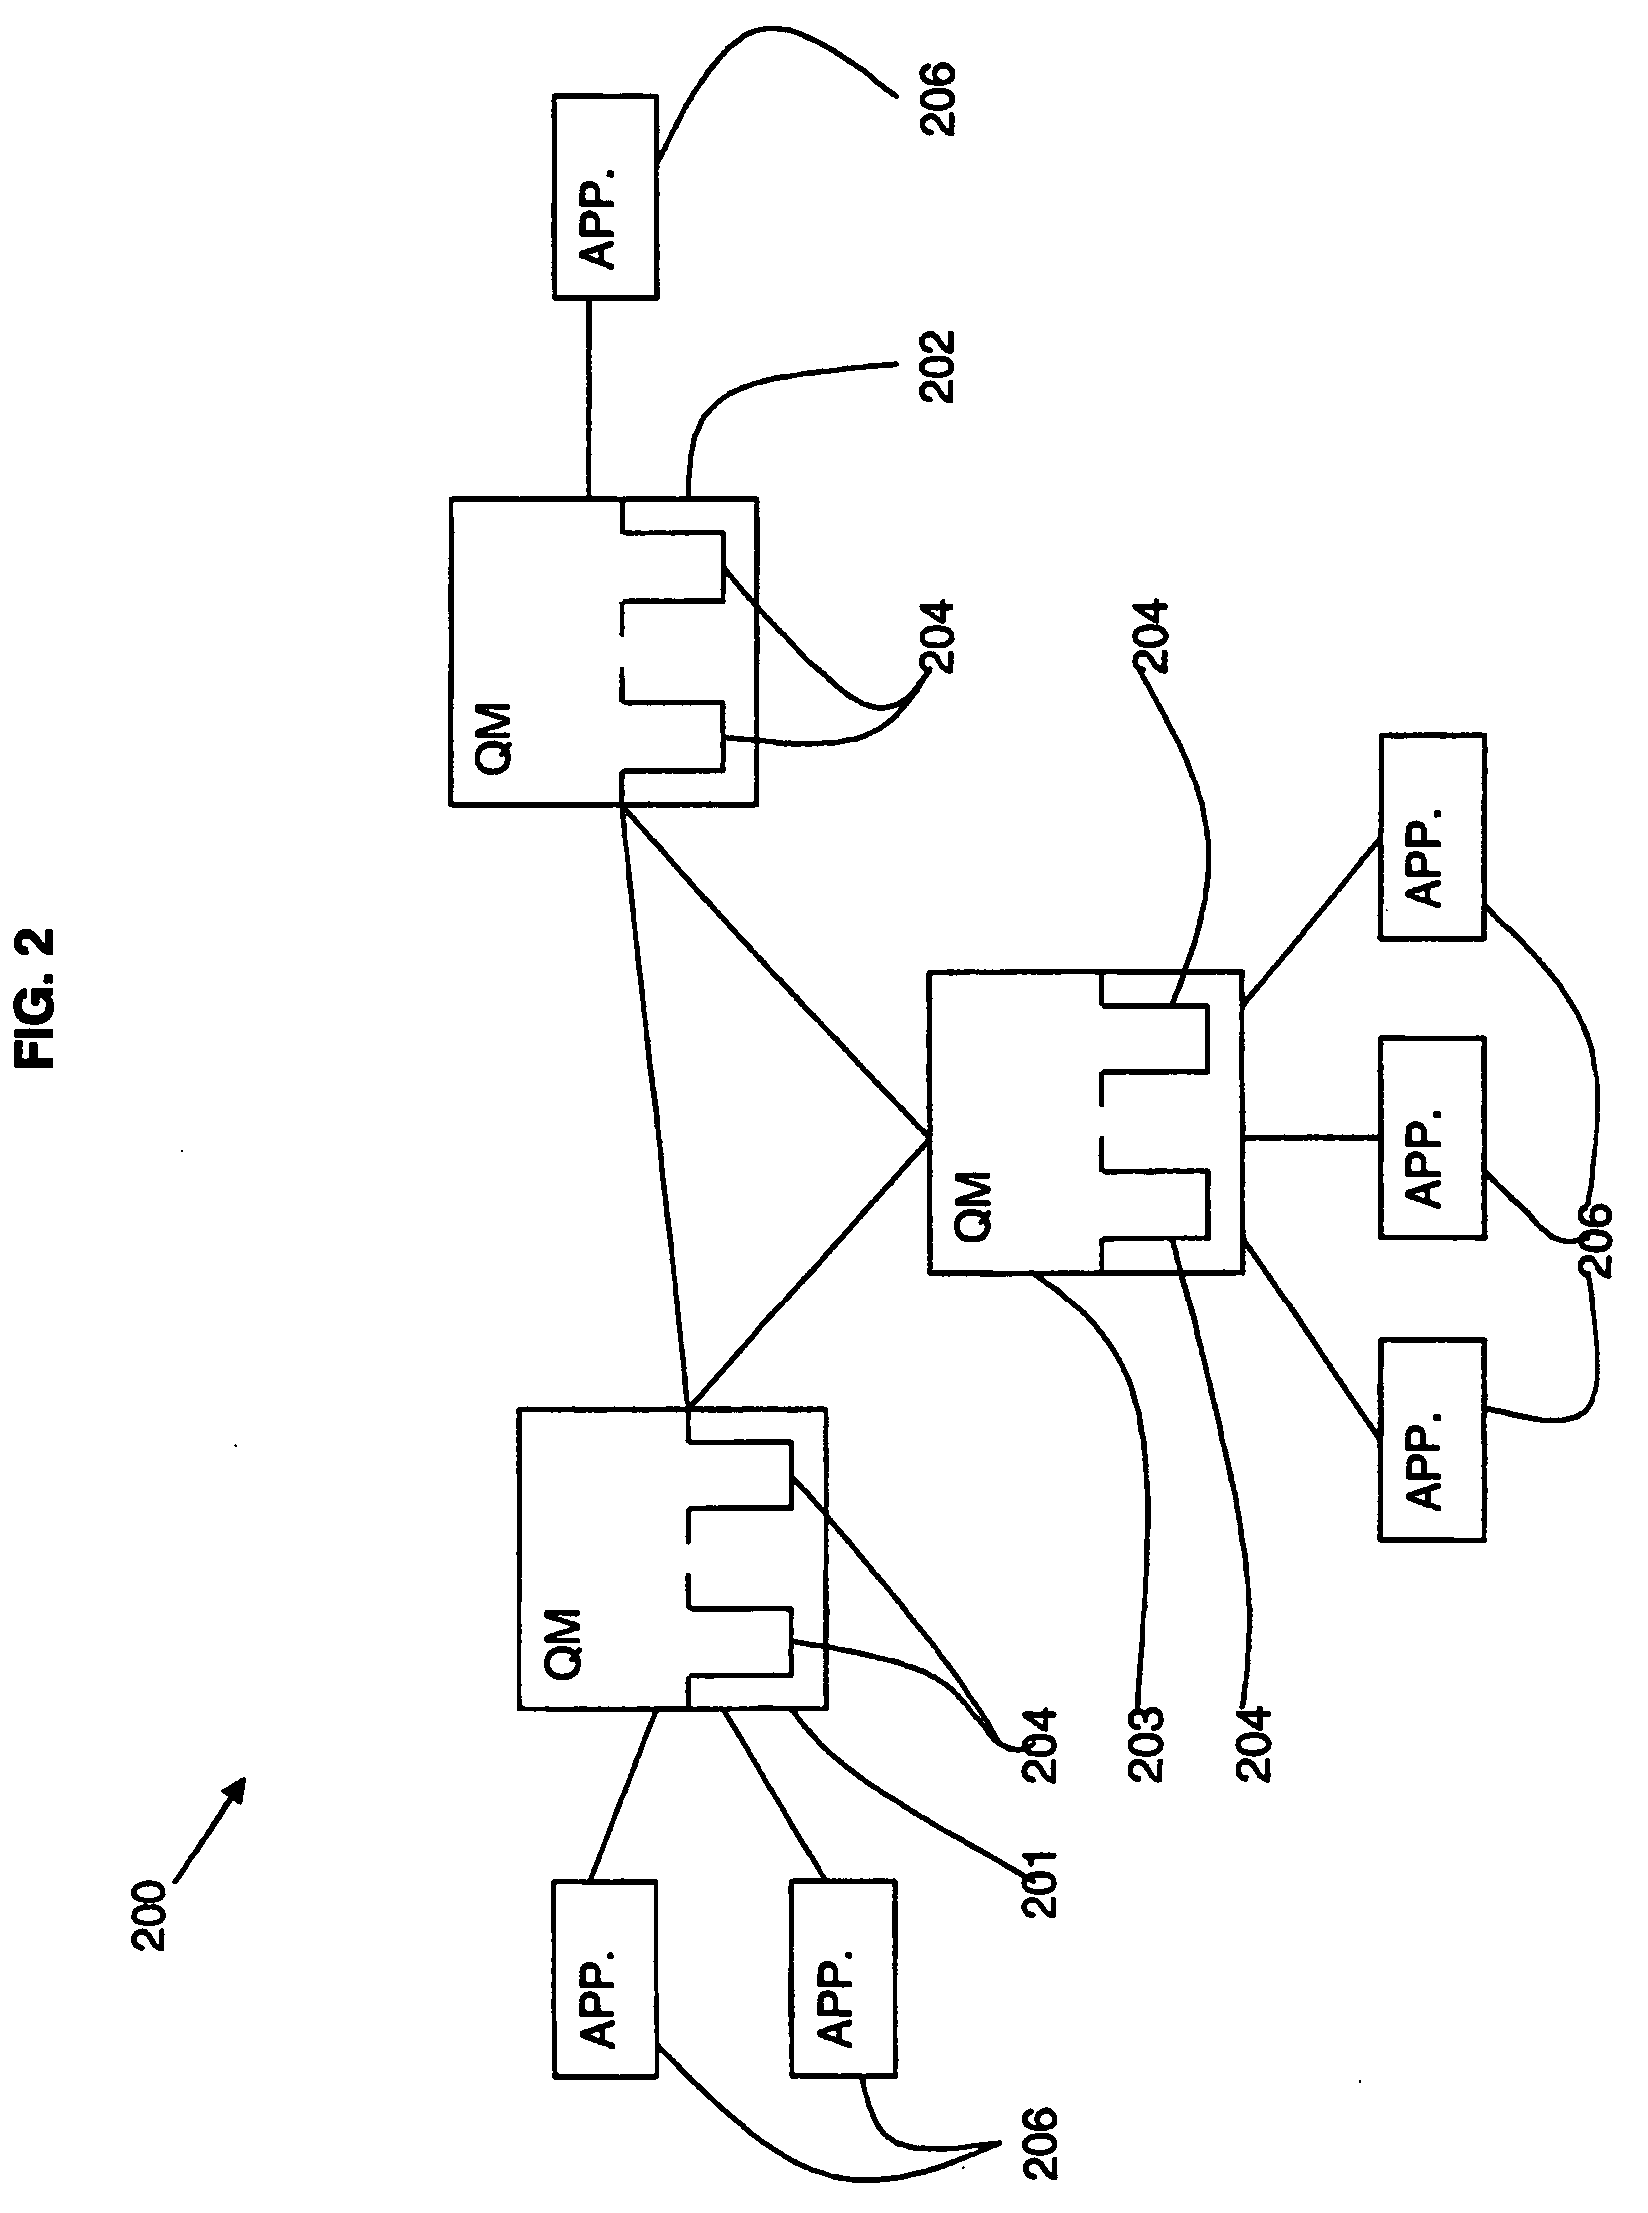 Method and system of committing operations of a synchronized transaction